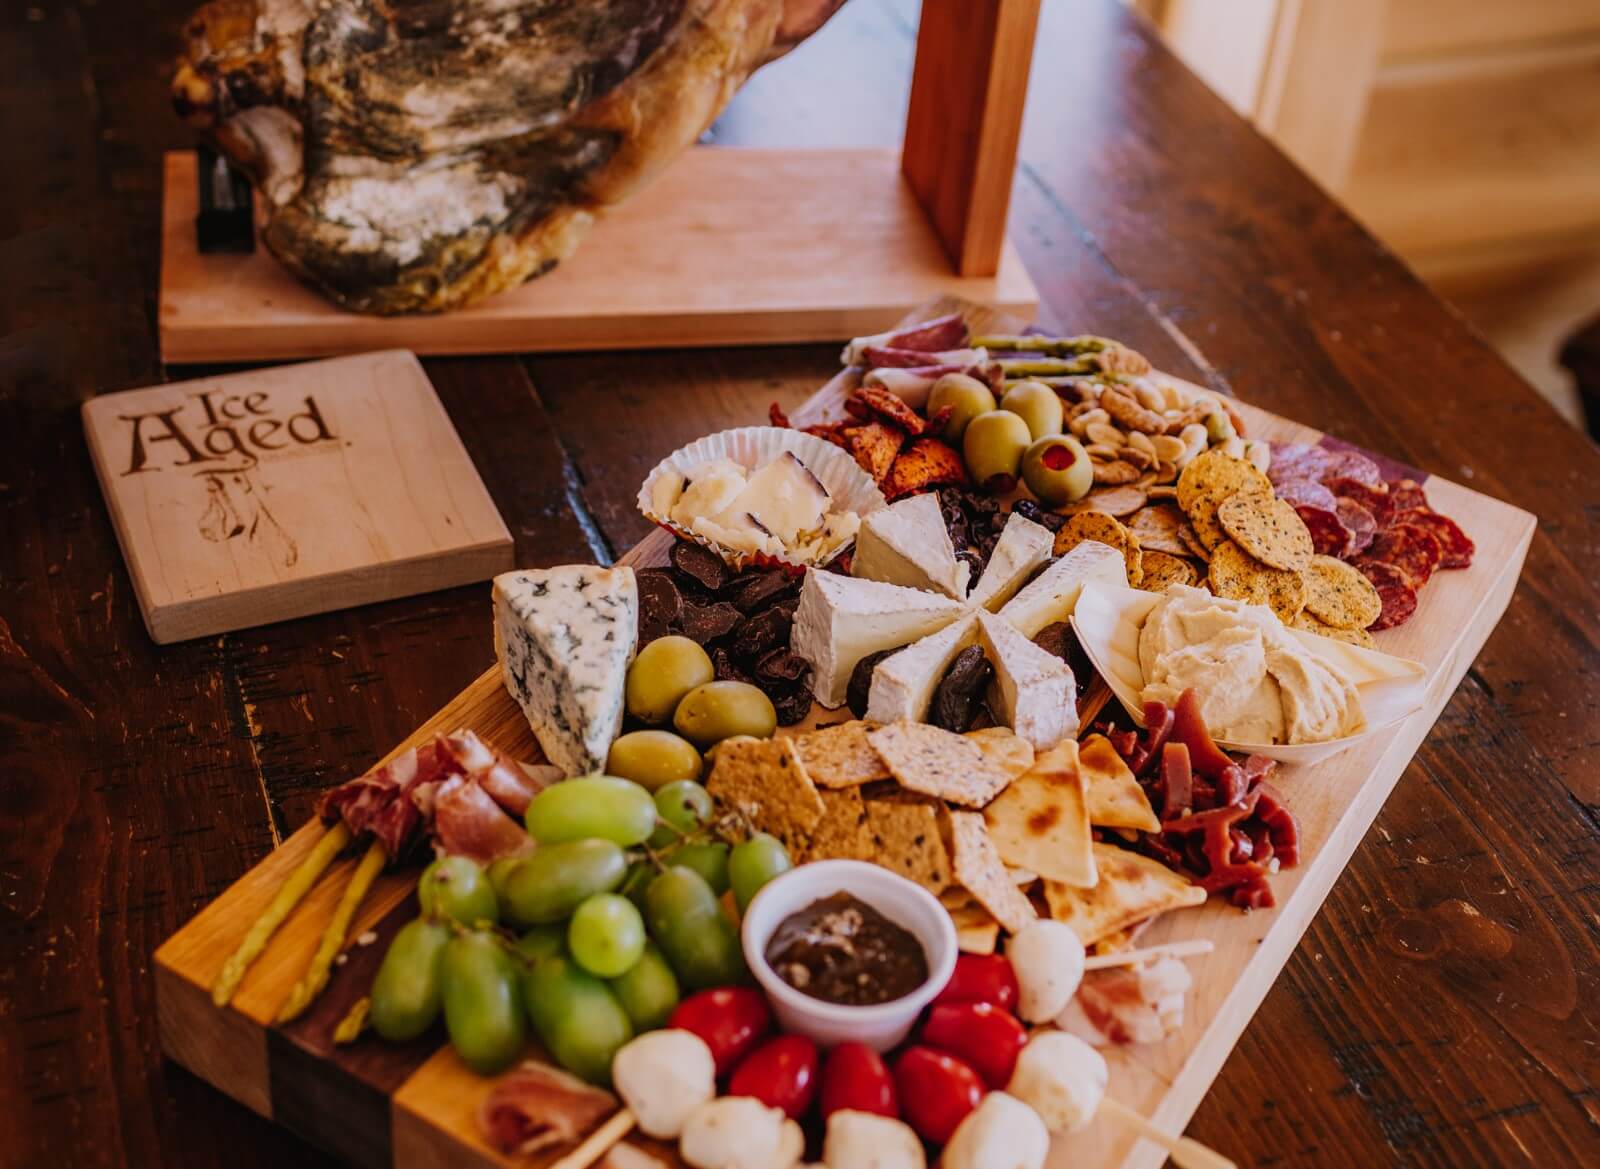 Ice Aged Charcuterie: How Local Support Creates a Ripple of Goodness from Pasture to Plate